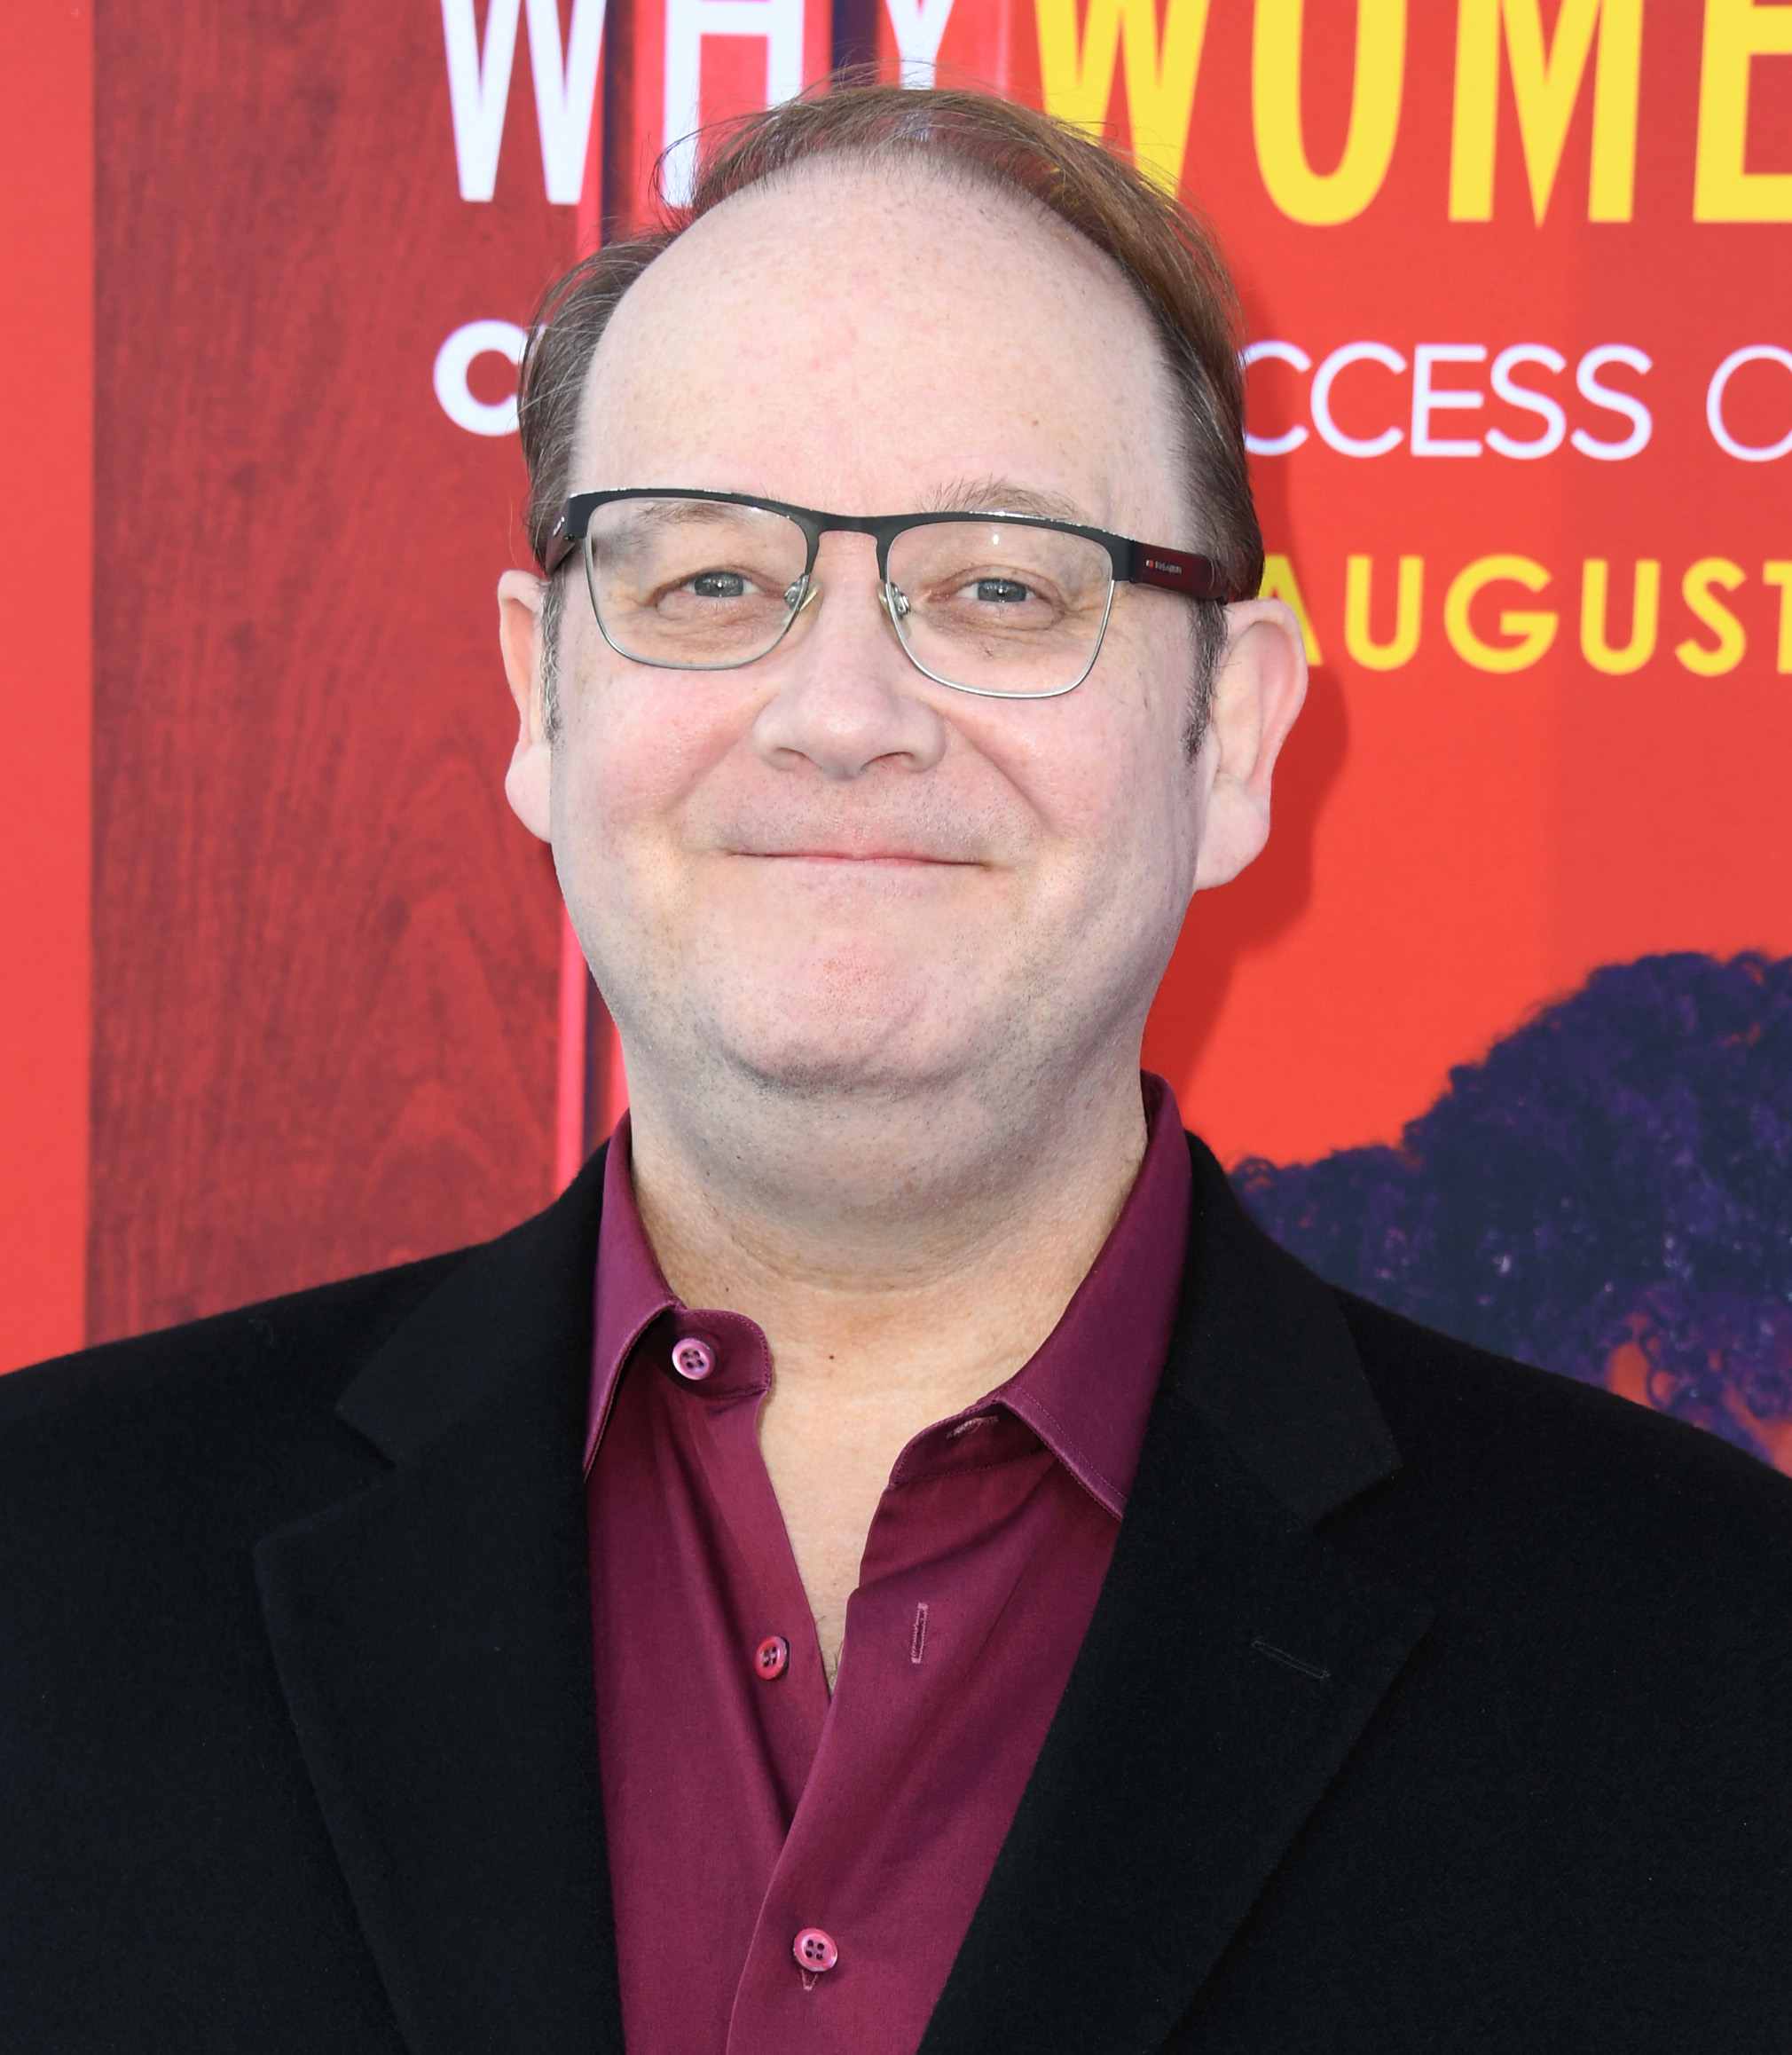 A close-up of Marc Cherry at a media event